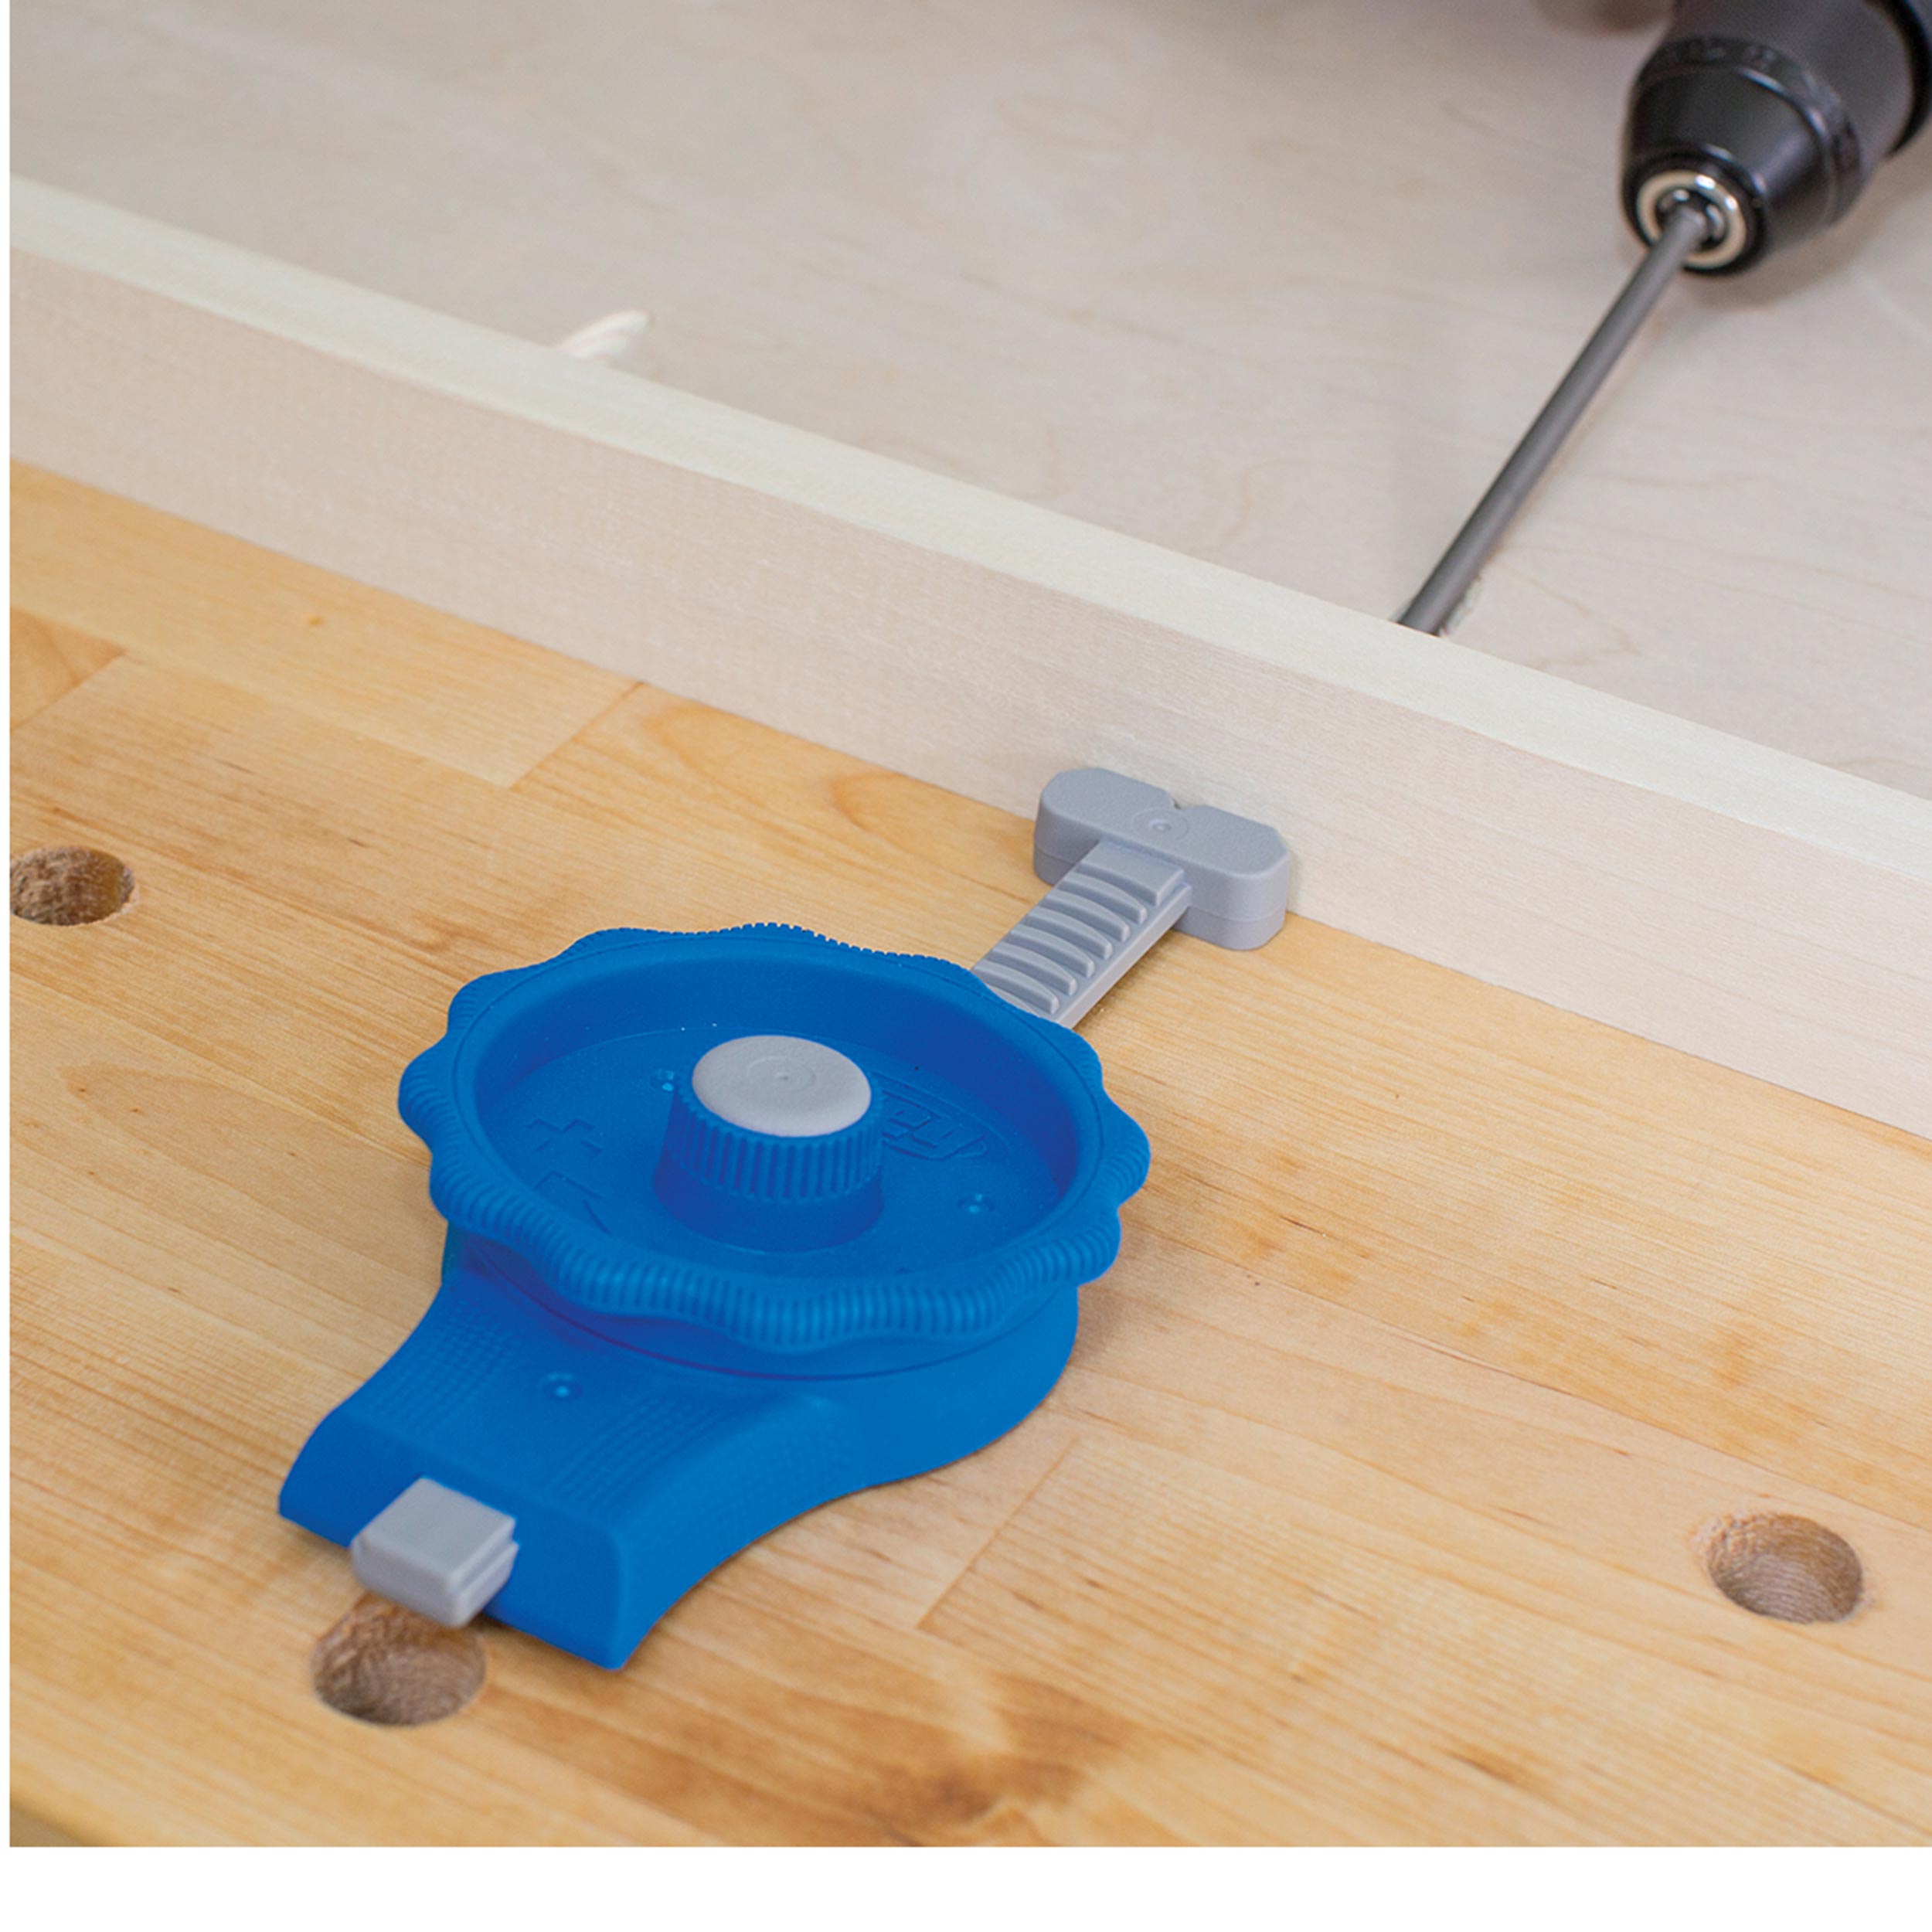 In-line Bench Clamp For Bench Dog Holes